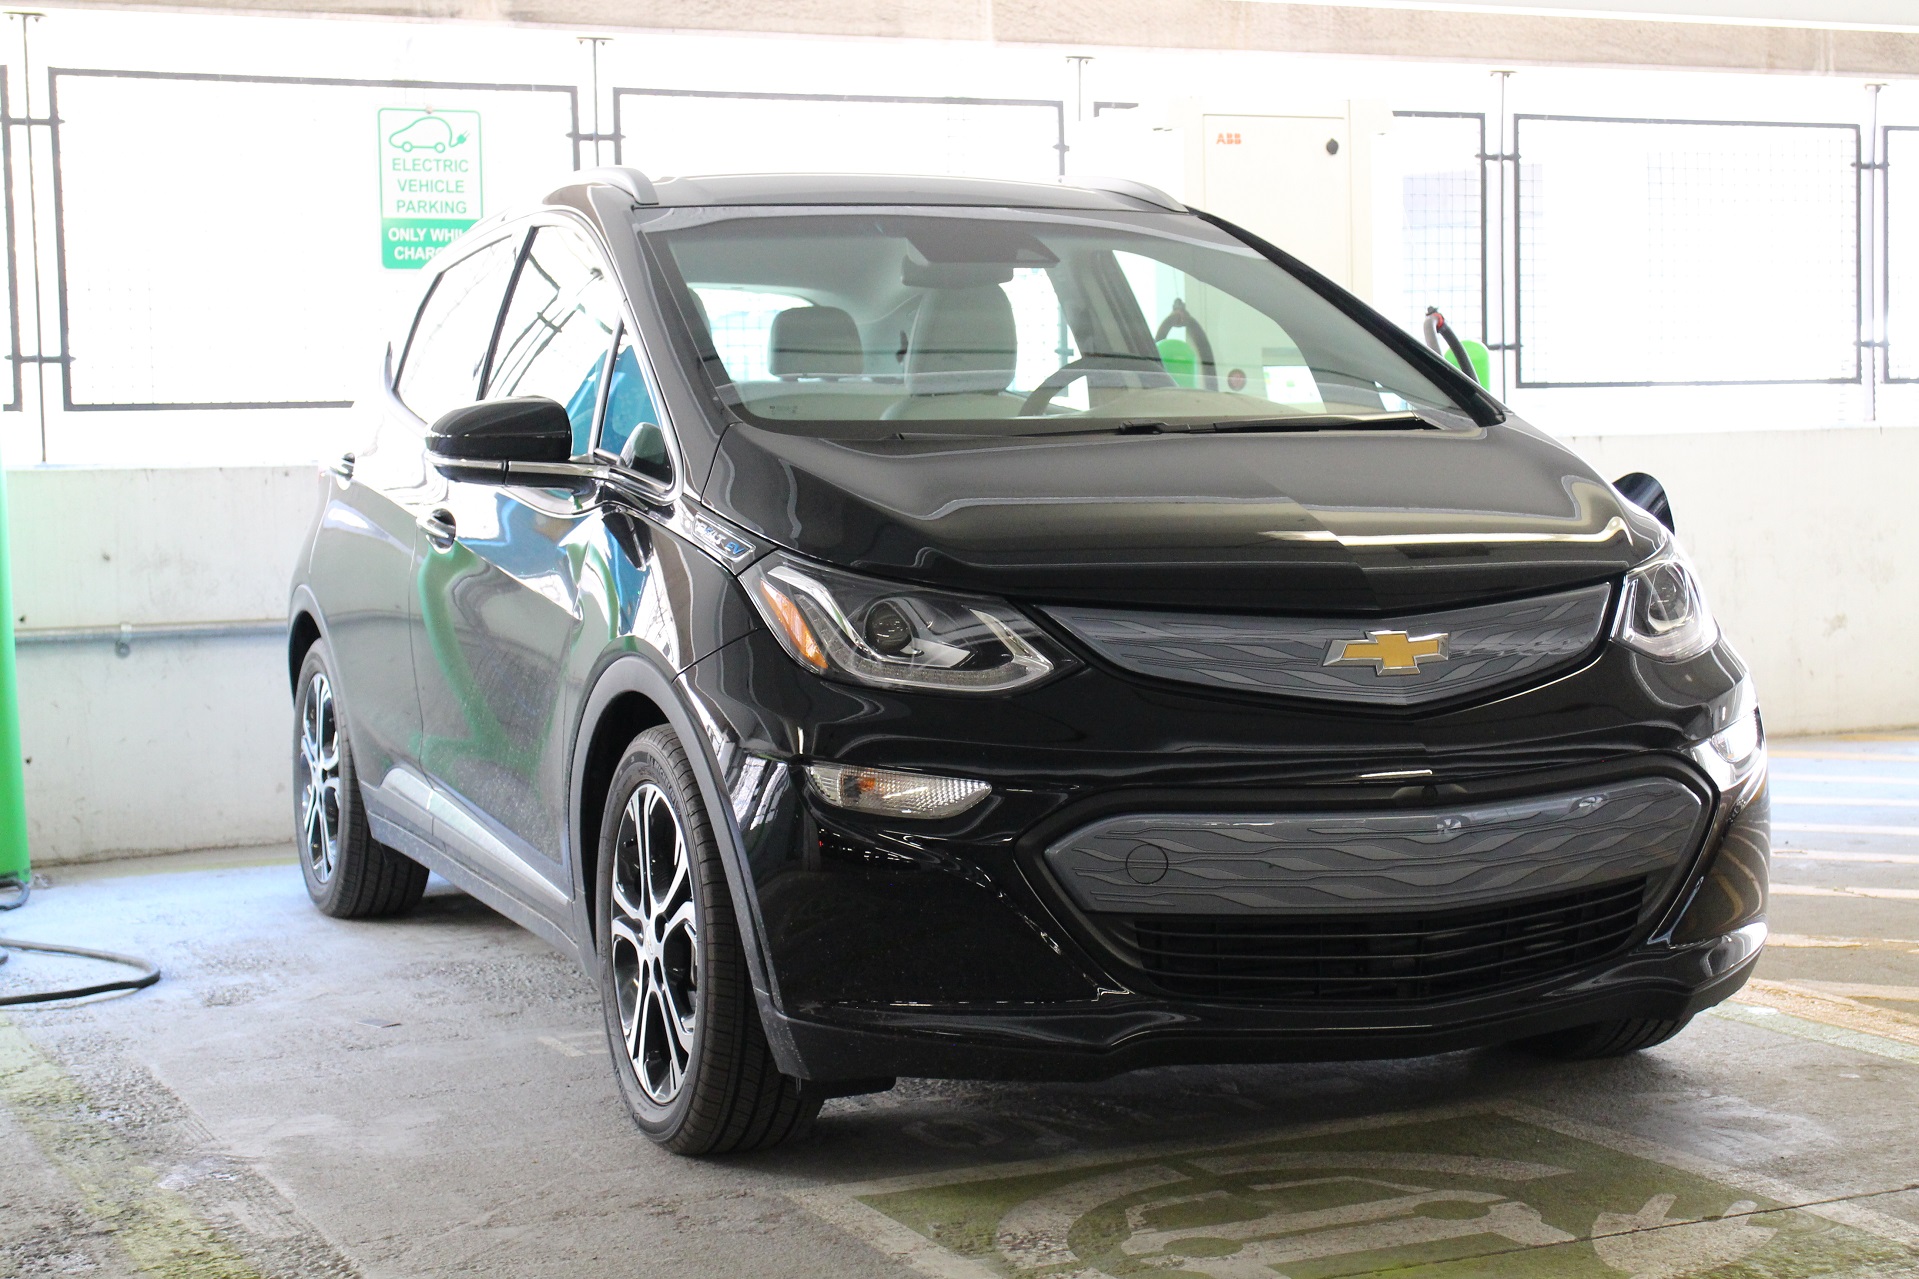 2017 Chevy Bolt EV electric car: first national lease deal starts at $329 monthly